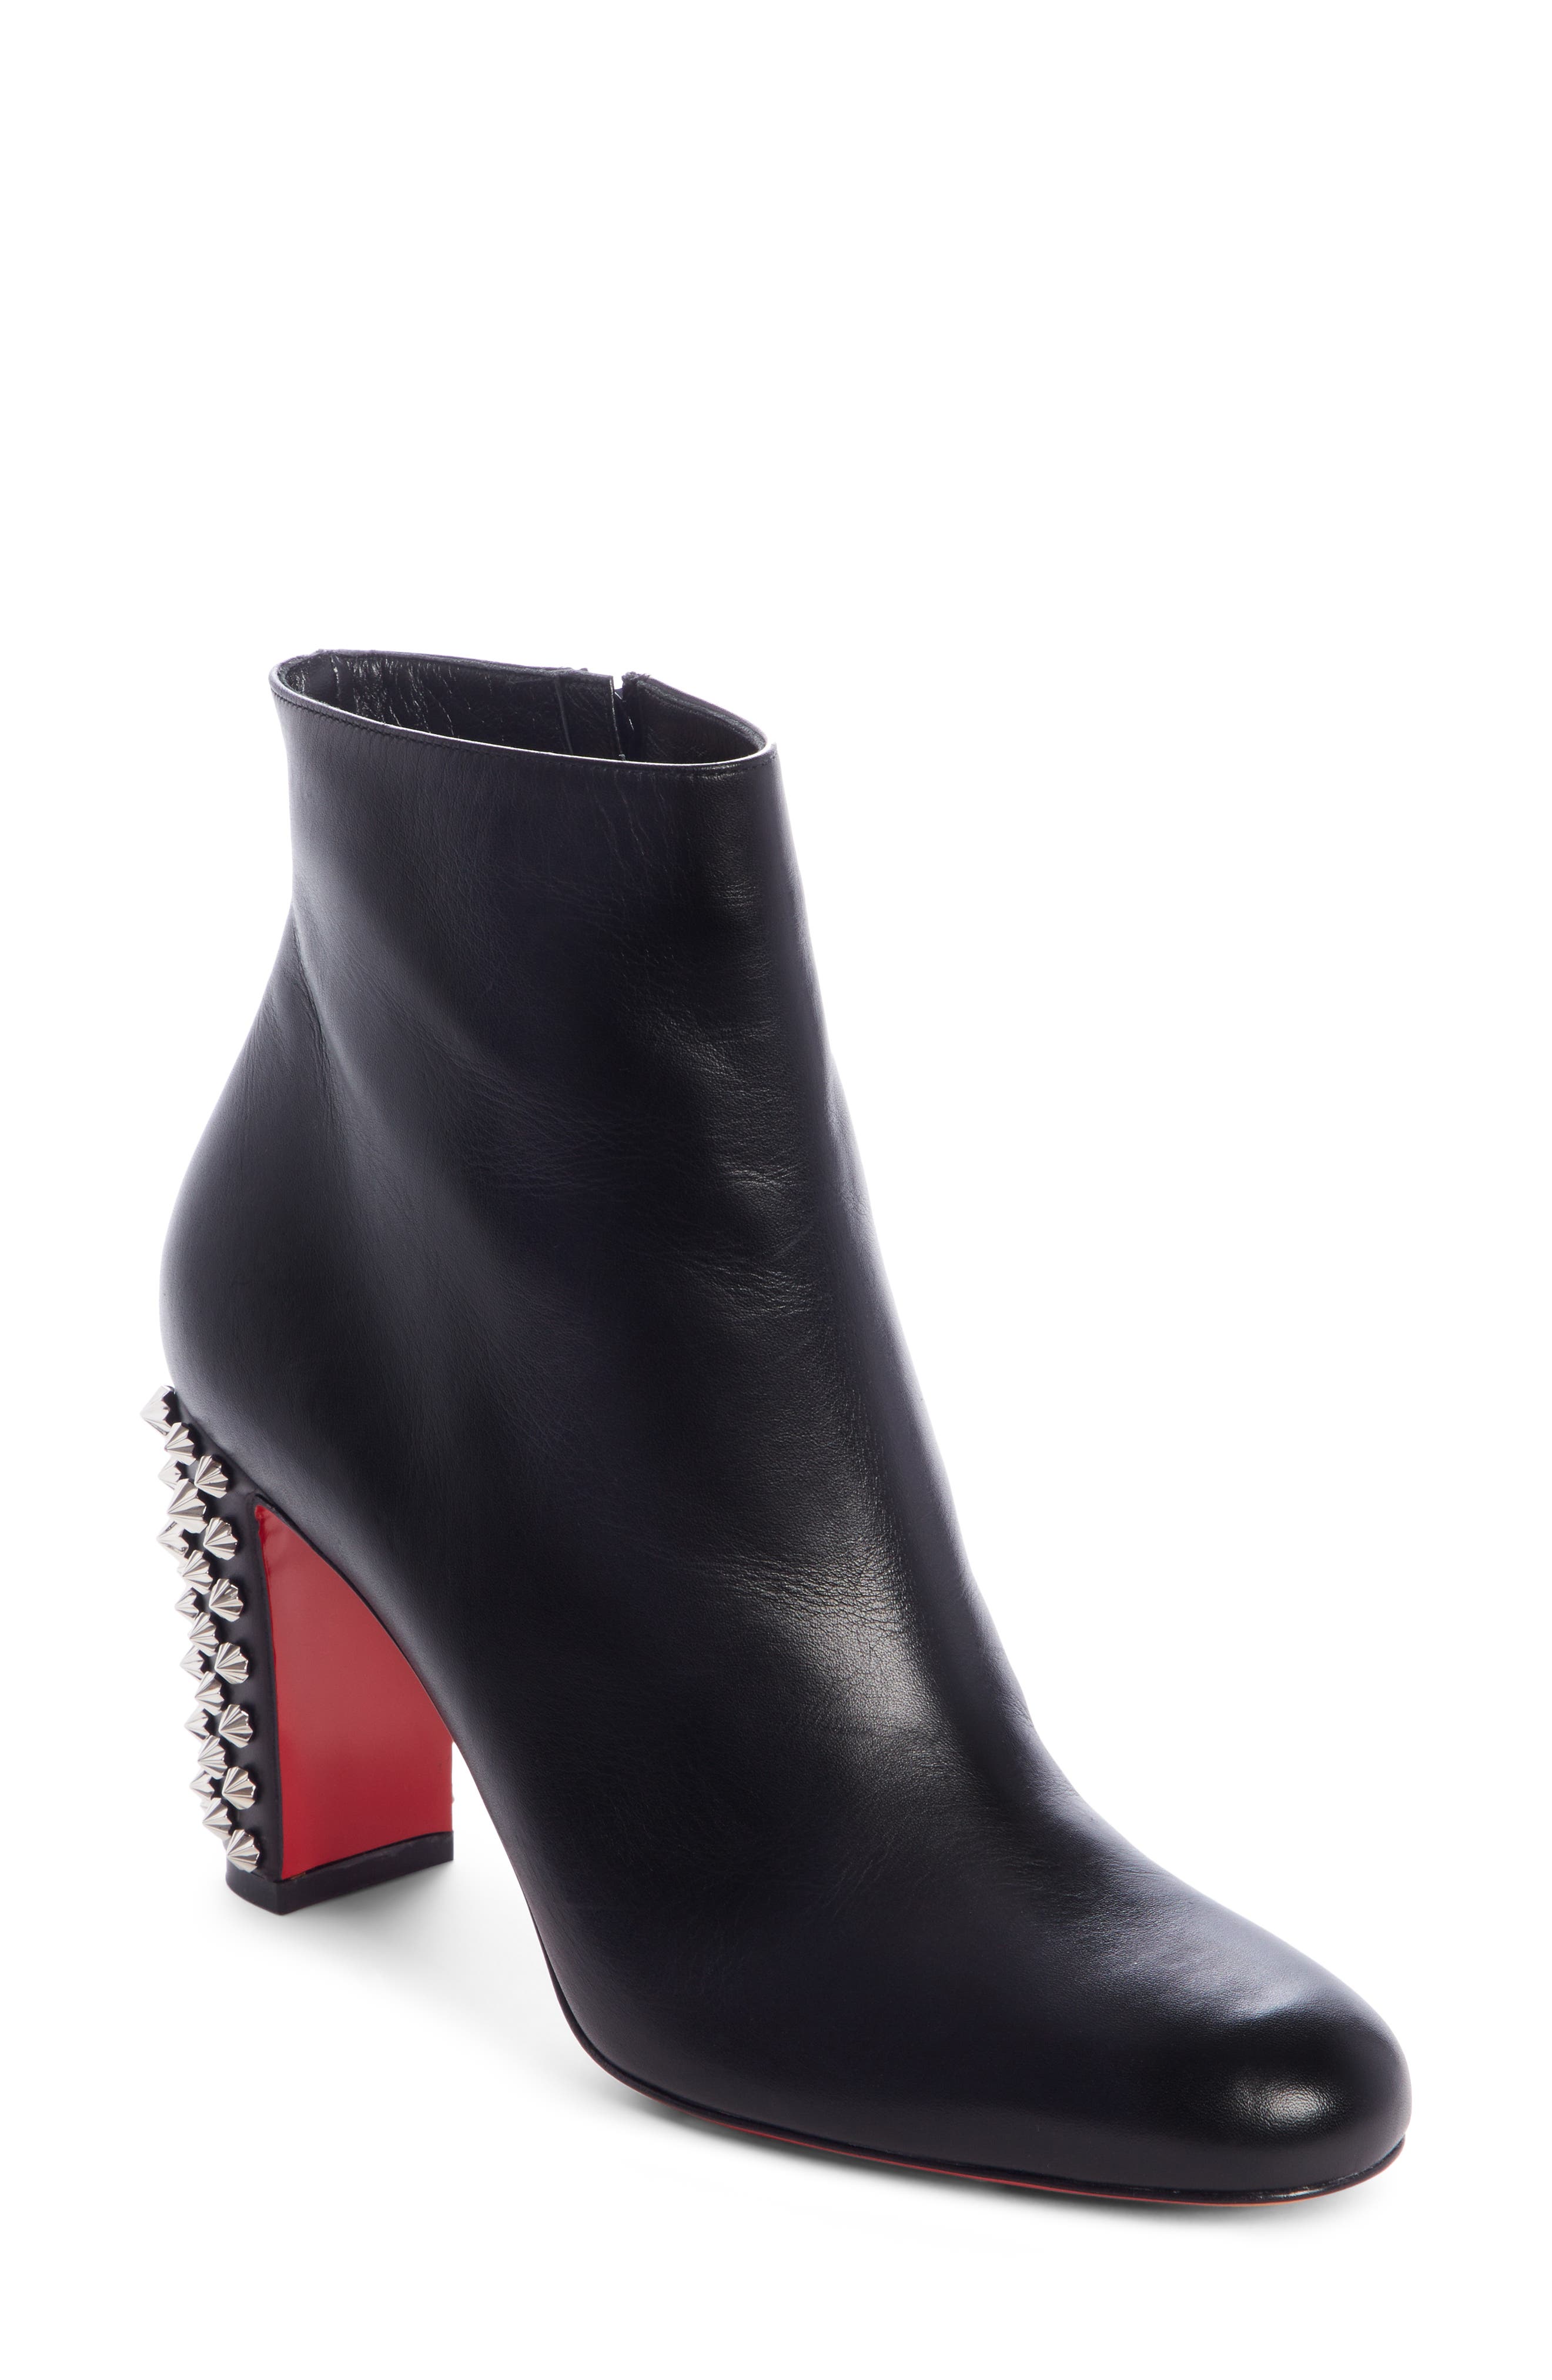 christian louboutin spiked booties